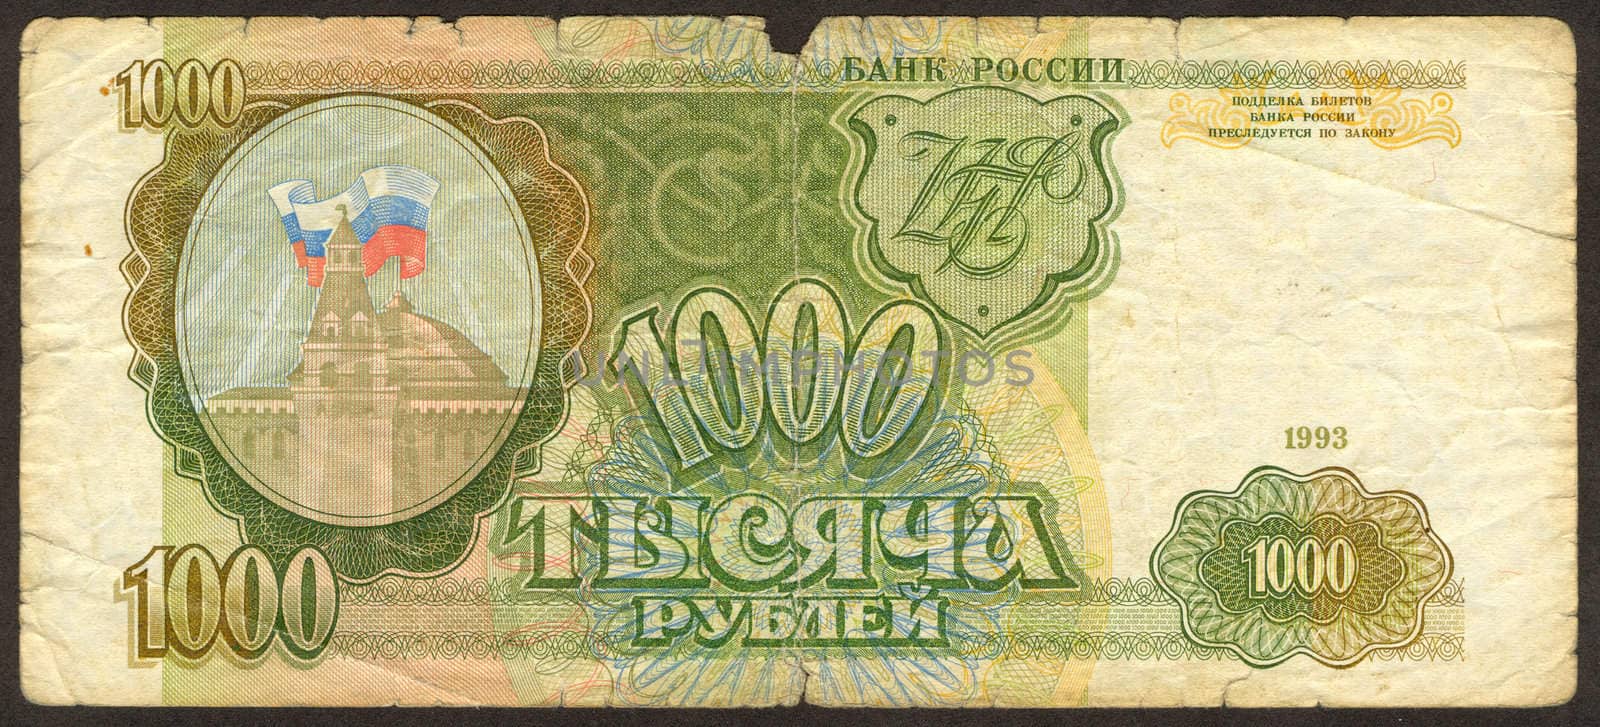 The scanned image of Soviet money. One thousand roubles, are made in 1993.